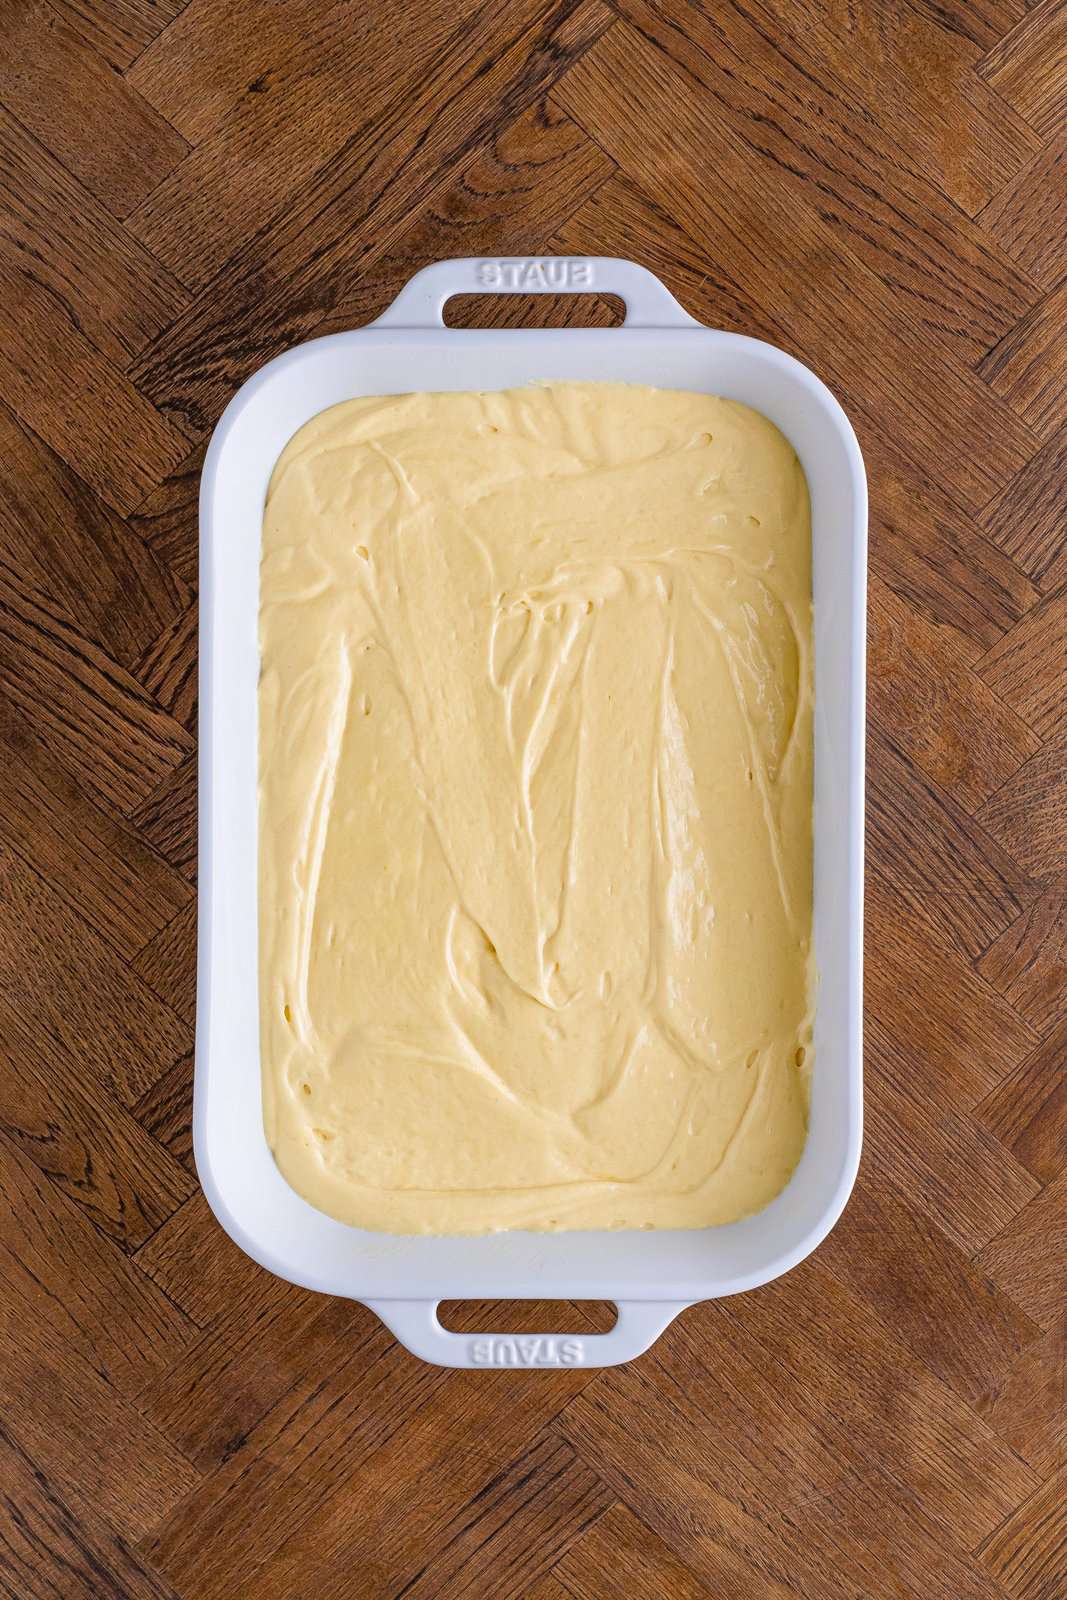 Baking dish with yellow cake mix batter from scratch.